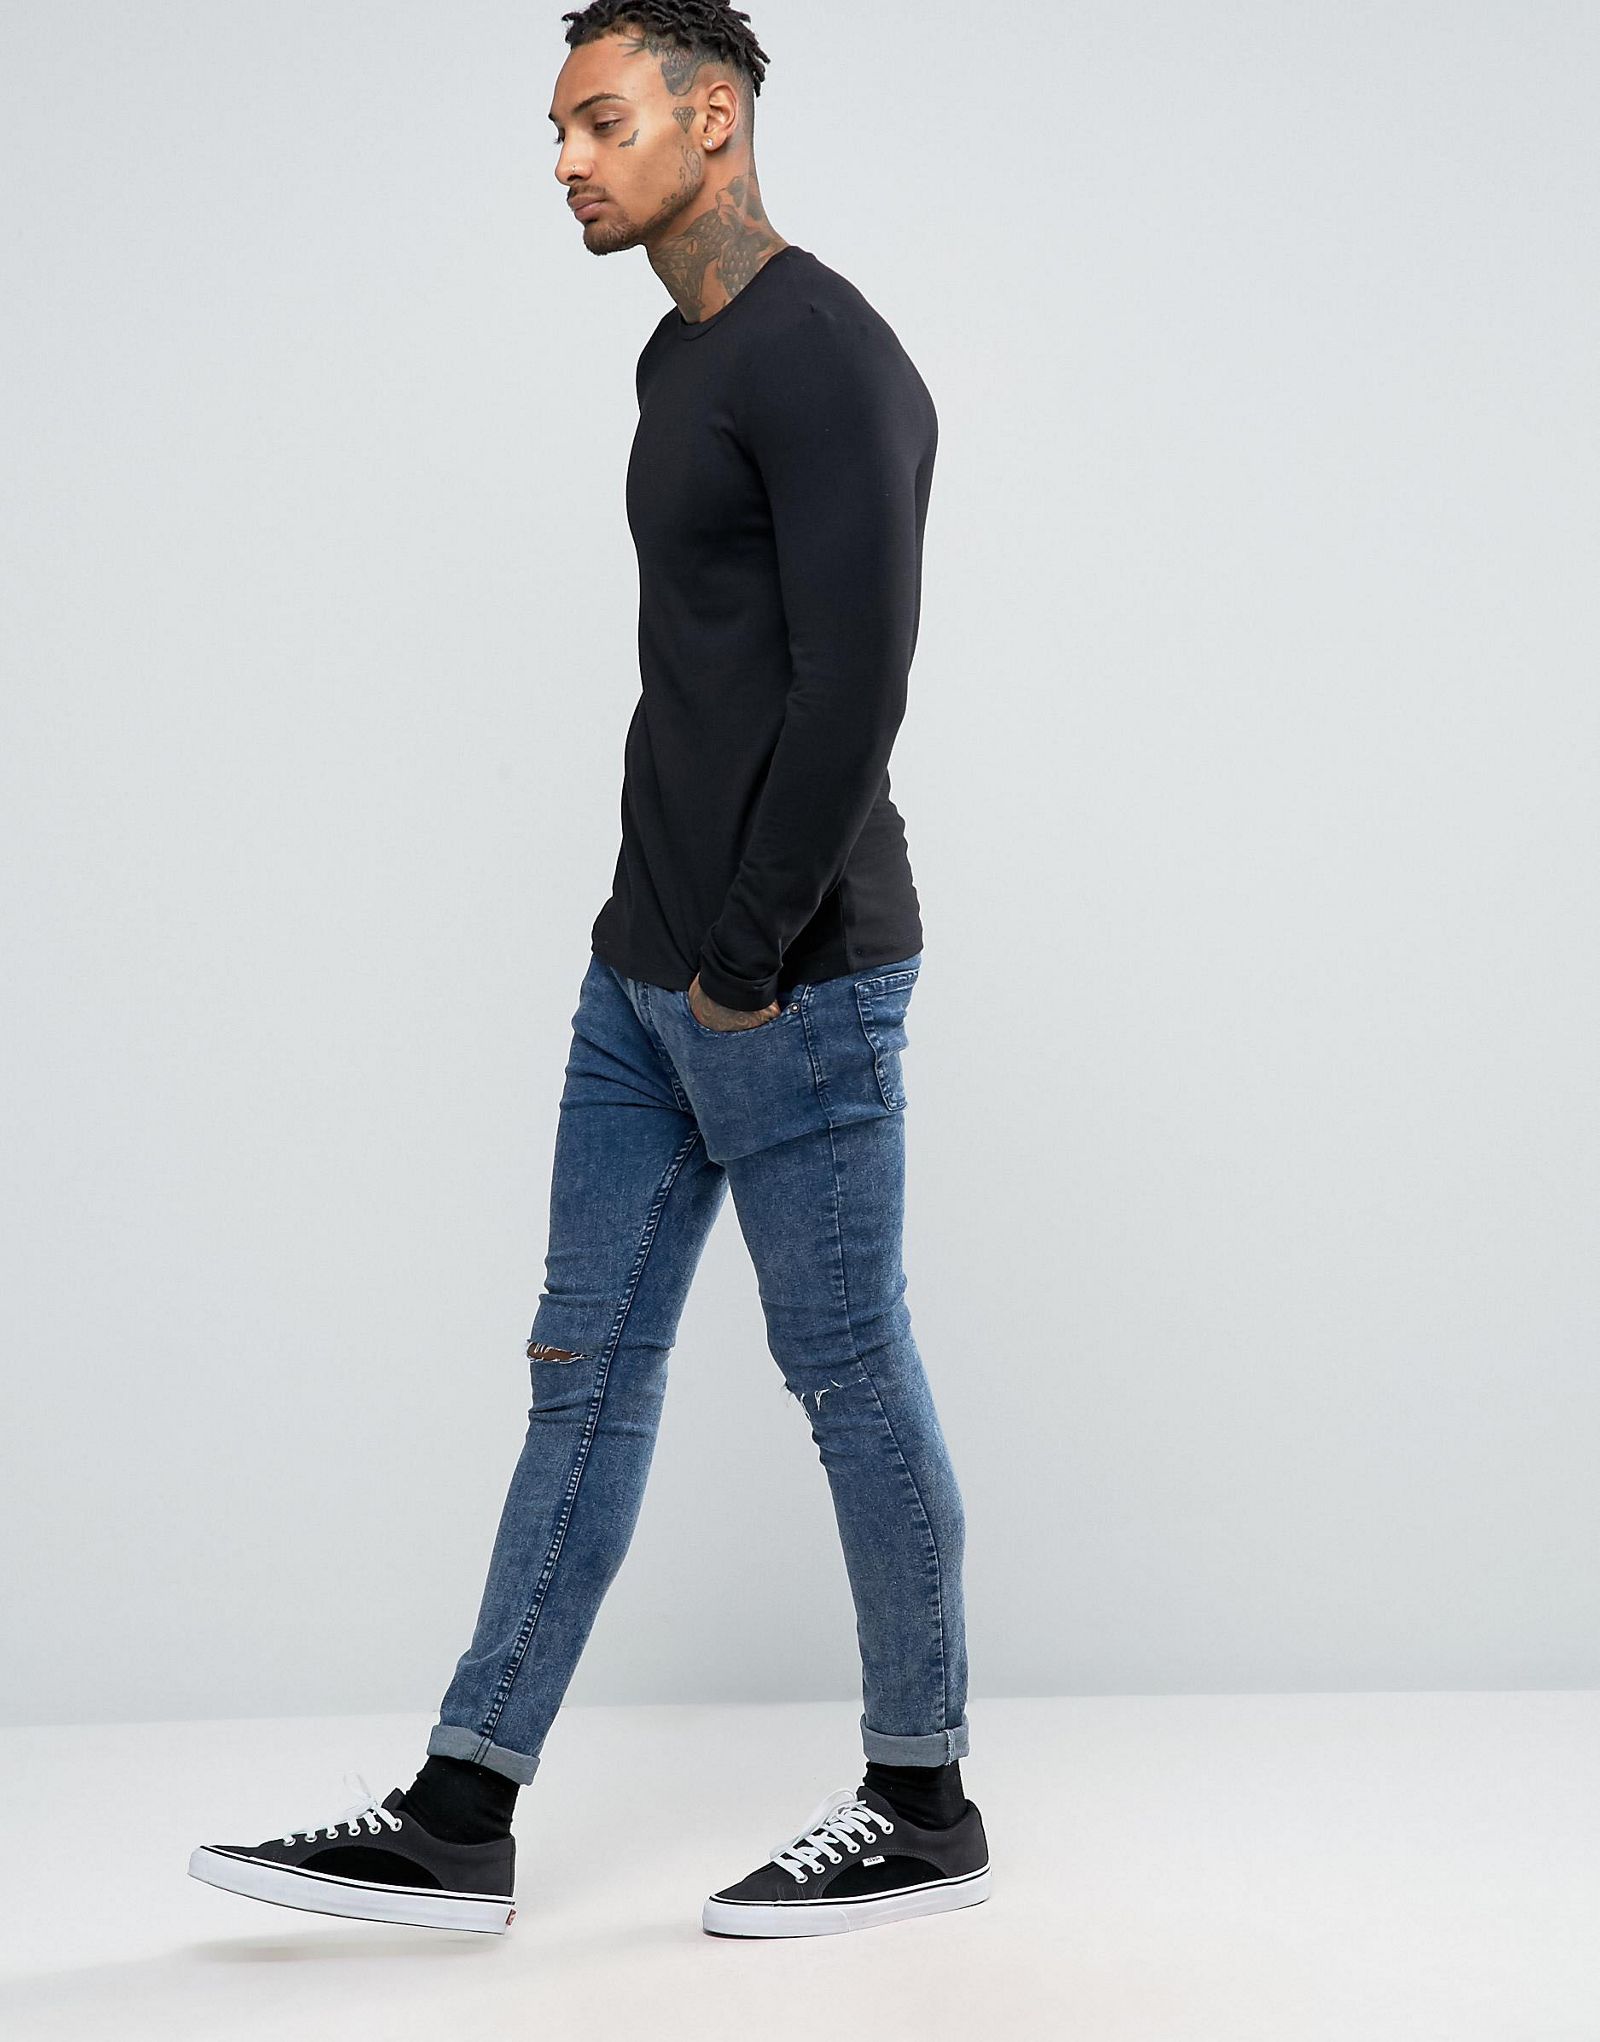 ASOS Extreme Muscle Long Sleeve T-Shirt 7 Pack SAVE 25%